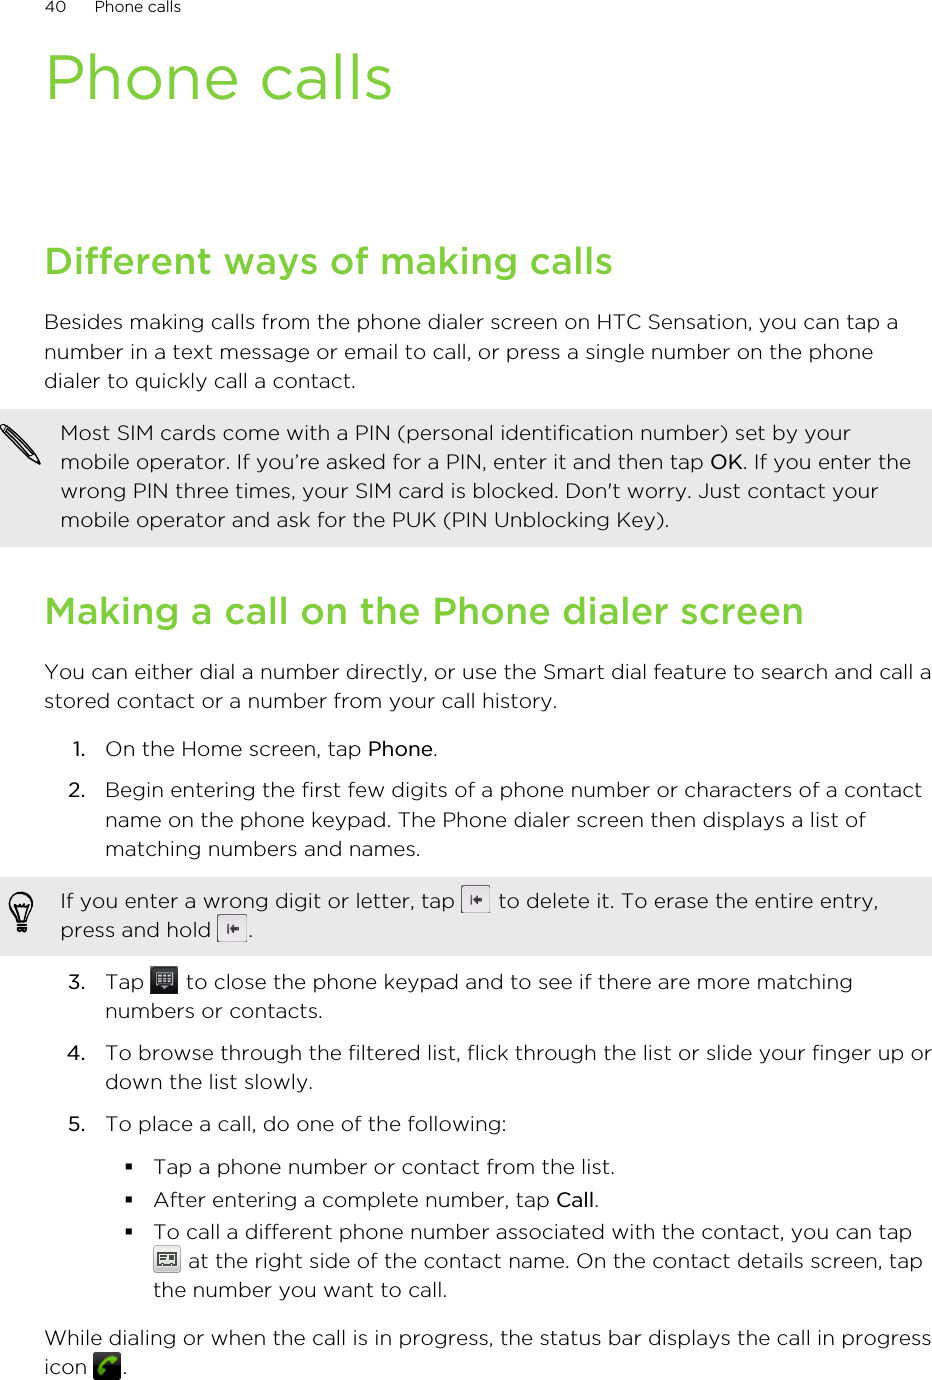 Phone callsDifferent ways of making callsBesides making calls from the phone dialer screen on HTC Sensation, you can tap anumber in a text message or email to call, or press a single number on the phonedialer to quickly call a contact.Most SIM cards come with a PIN (personal identification number) set by yourmobile operator. If you’re asked for a PIN, enter it and then tap OK. If you enter thewrong PIN three times, your SIM card is blocked. Don&apos;t worry. Just contact yourmobile operator and ask for the PUK (PIN Unblocking Key).Making a call on the Phone dialer screenYou can either dial a number directly, or use the Smart dial feature to search and call astored contact or a number from your call history.1. On the Home screen, tap Phone.2. Begin entering the first few digits of a phone number or characters of a contactname on the phone keypad. The Phone dialer screen then displays a list ofmatching numbers and names.If you enter a wrong digit or letter, tap   to delete it. To erase the entire entry,press and hold  .3. Tap   to close the phone keypad and to see if there are more matchingnumbers or contacts.4. To browse through the filtered list, flick through the list or slide your finger up ordown the list slowly.5. To place a call, do one of the following:§Tap a phone number or contact from the list.§After entering a complete number, tap Call.§To call a different phone number associated with the contact, you can tap at the right side of the contact name. On the contact details screen, tapthe number you want to call.While dialing or when the call is in progress, the status bar displays the call in progressicon  .40 Phone calls